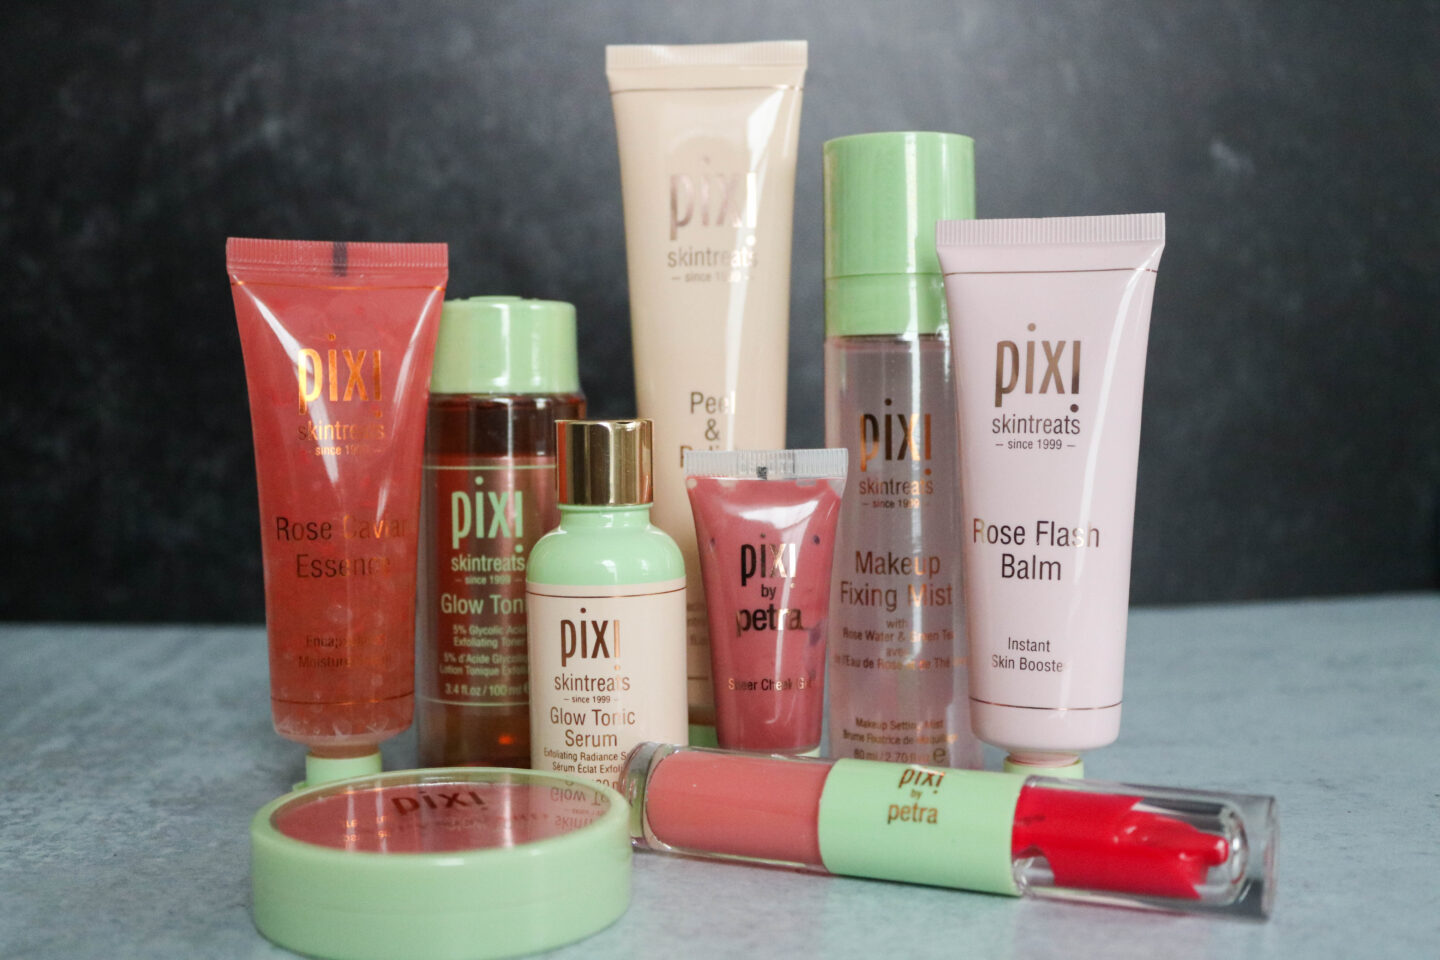 Pixi Beauty Get Your Glow On Galentine’s Giveaway – Closed